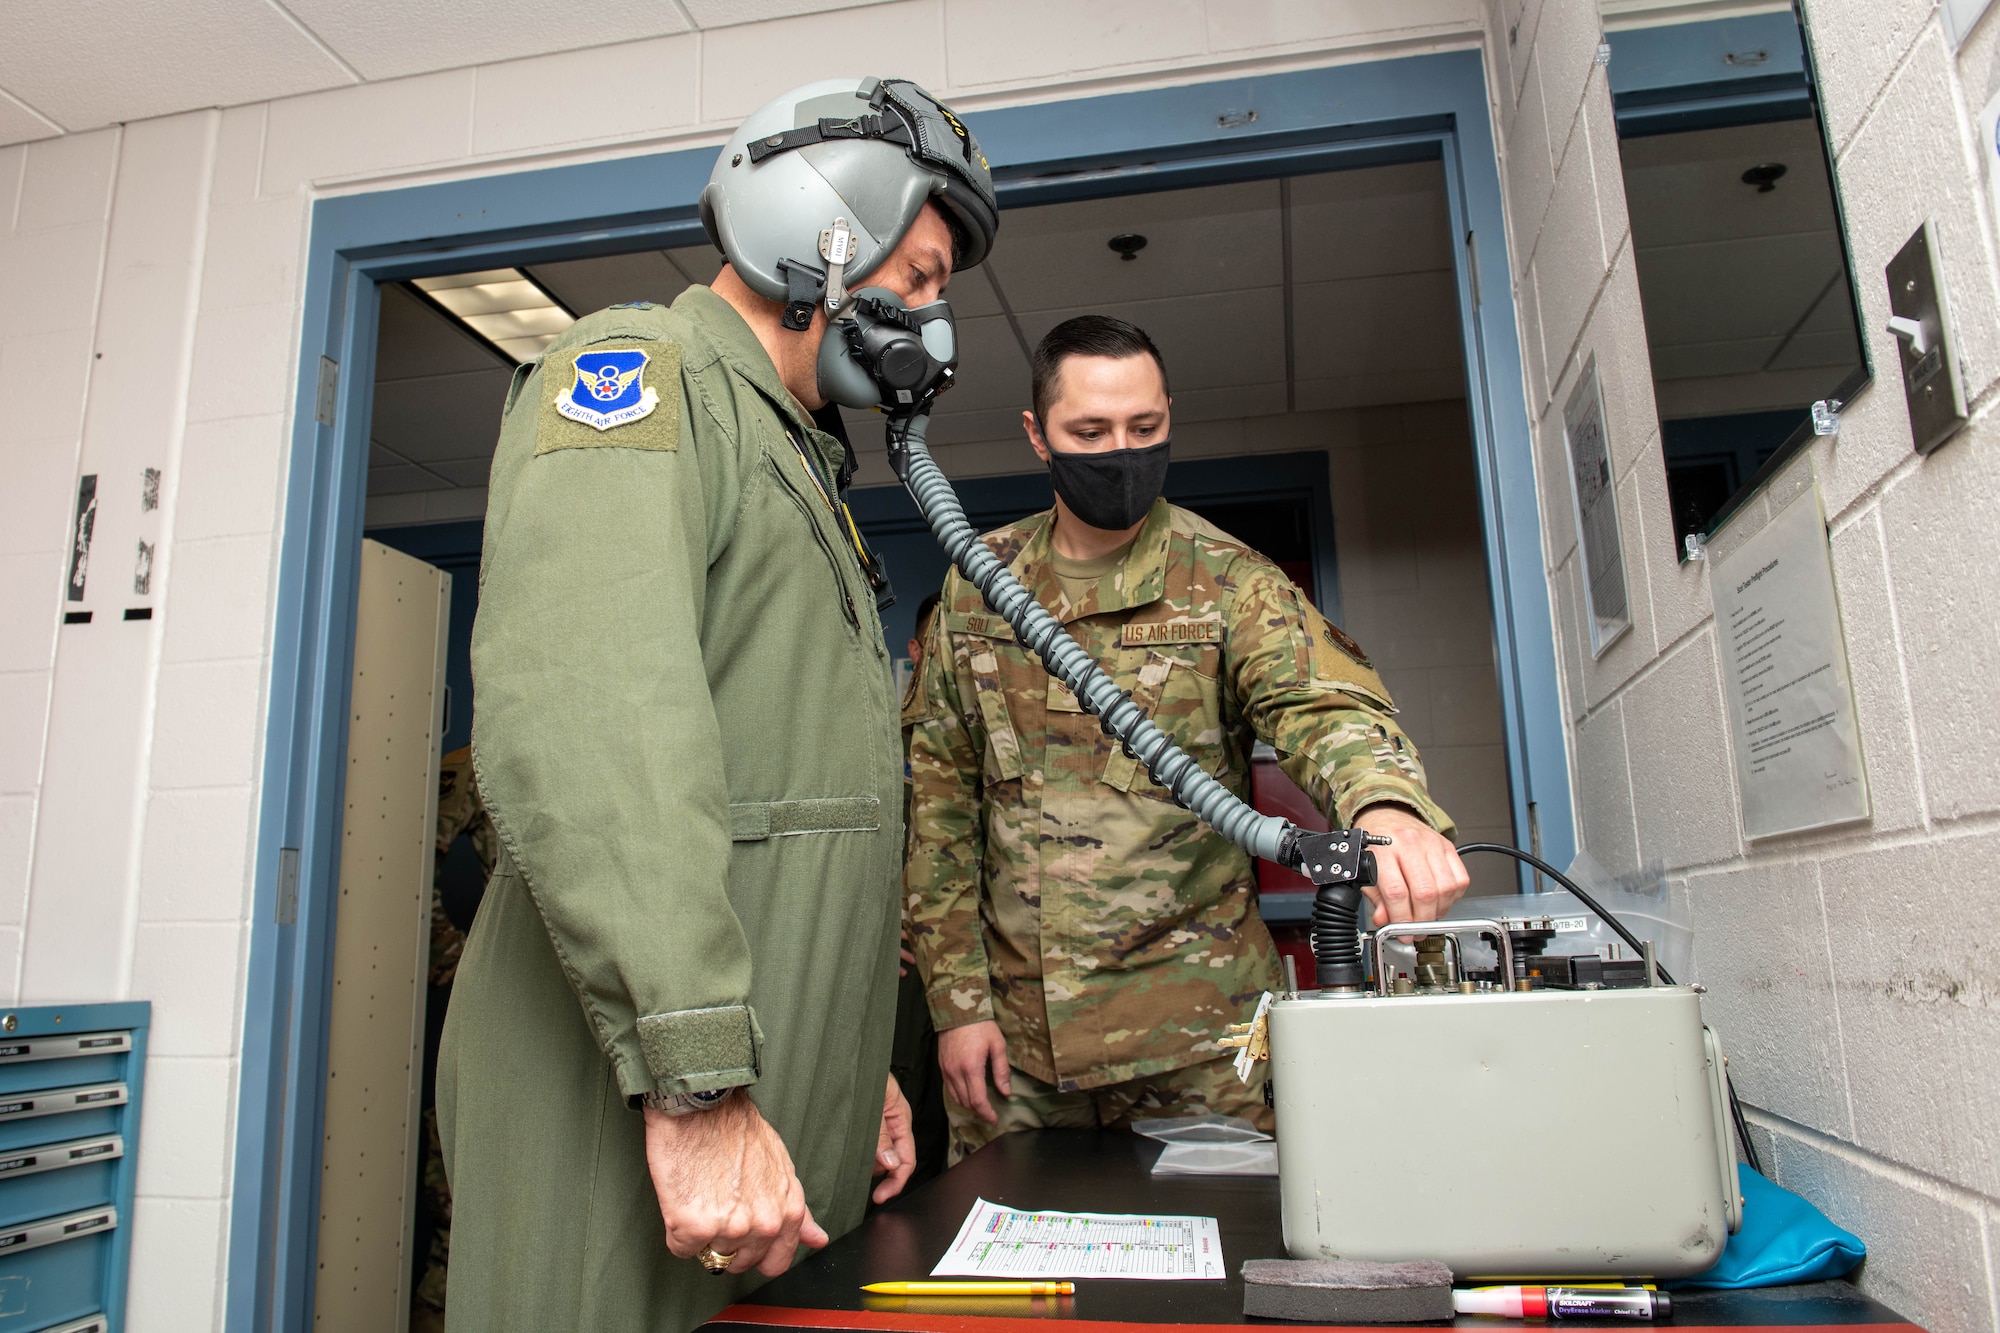 Senior Airman Jeremy Soli, 28th Operations Support Squadron aircrew flight equipment technician, and Maj. Gen. Andrew Gebara, 8th Air Force and Joint-Global Strike Operations Center commander, tests oxygen mask airflow at Ellsworth Air Force Base, S.D., Oct. 25, 2021. The J-GSOC serves as the central command and control node for all operations within Air Force Global Strike Command. (U.S. Air Force photo by Airman 1st Class Quentin Marx)